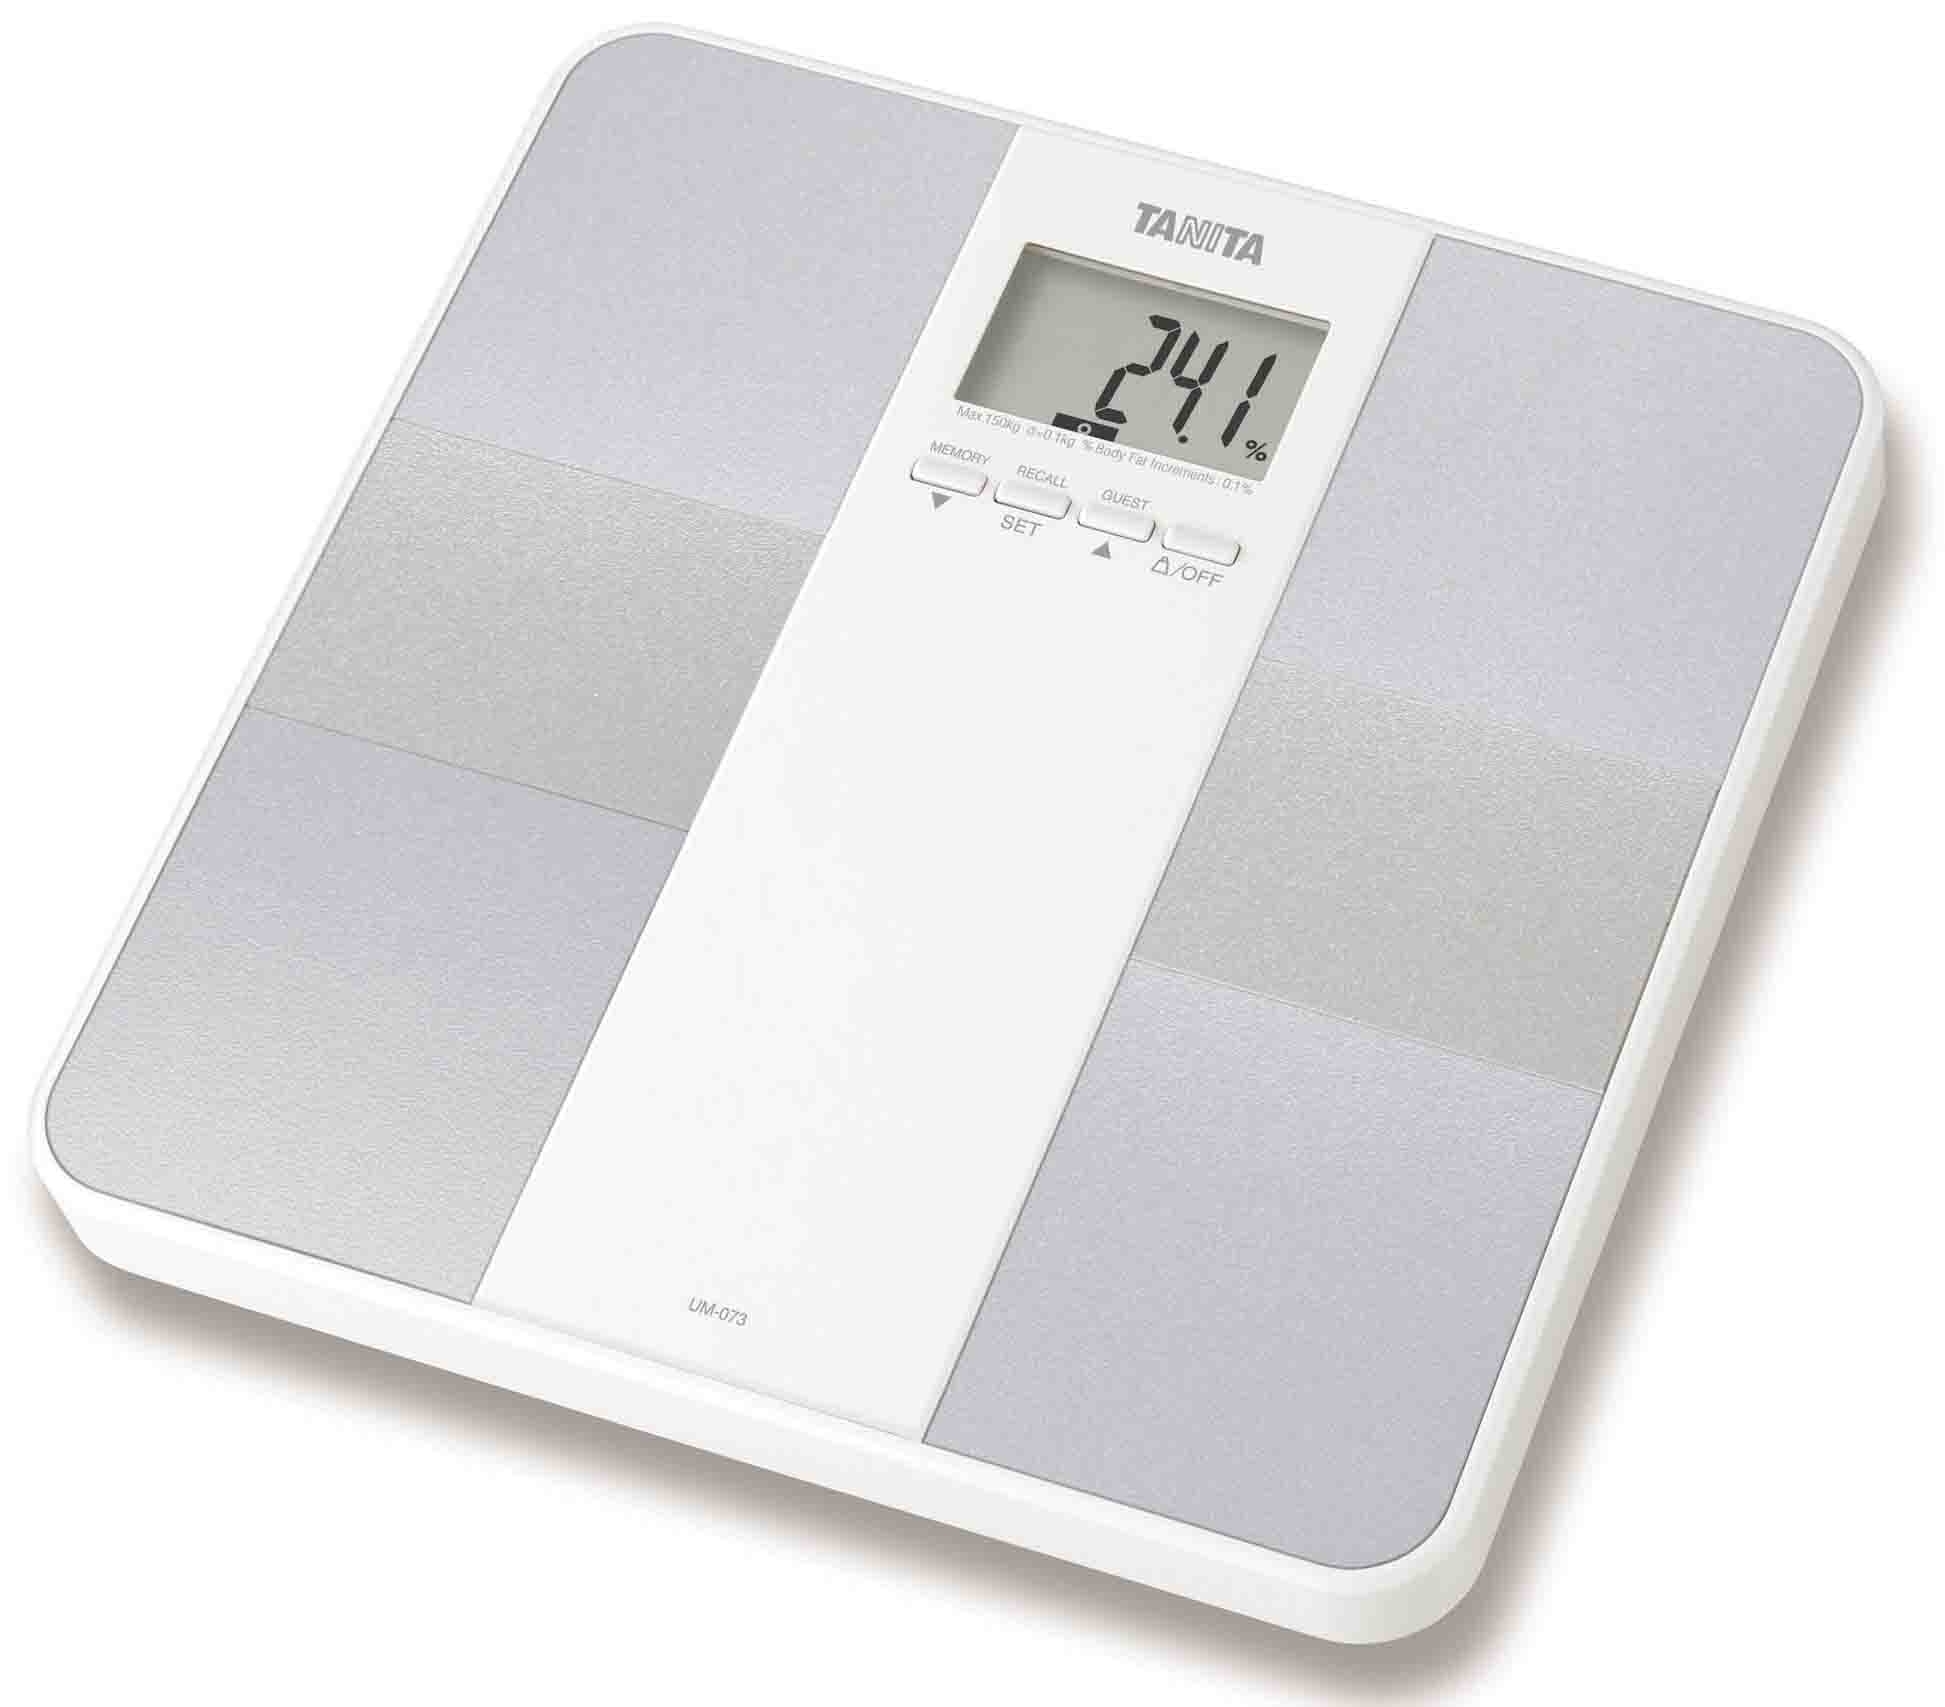 Body Fat and Water Monitor Tanita UM 073 for €40.13 in Scales